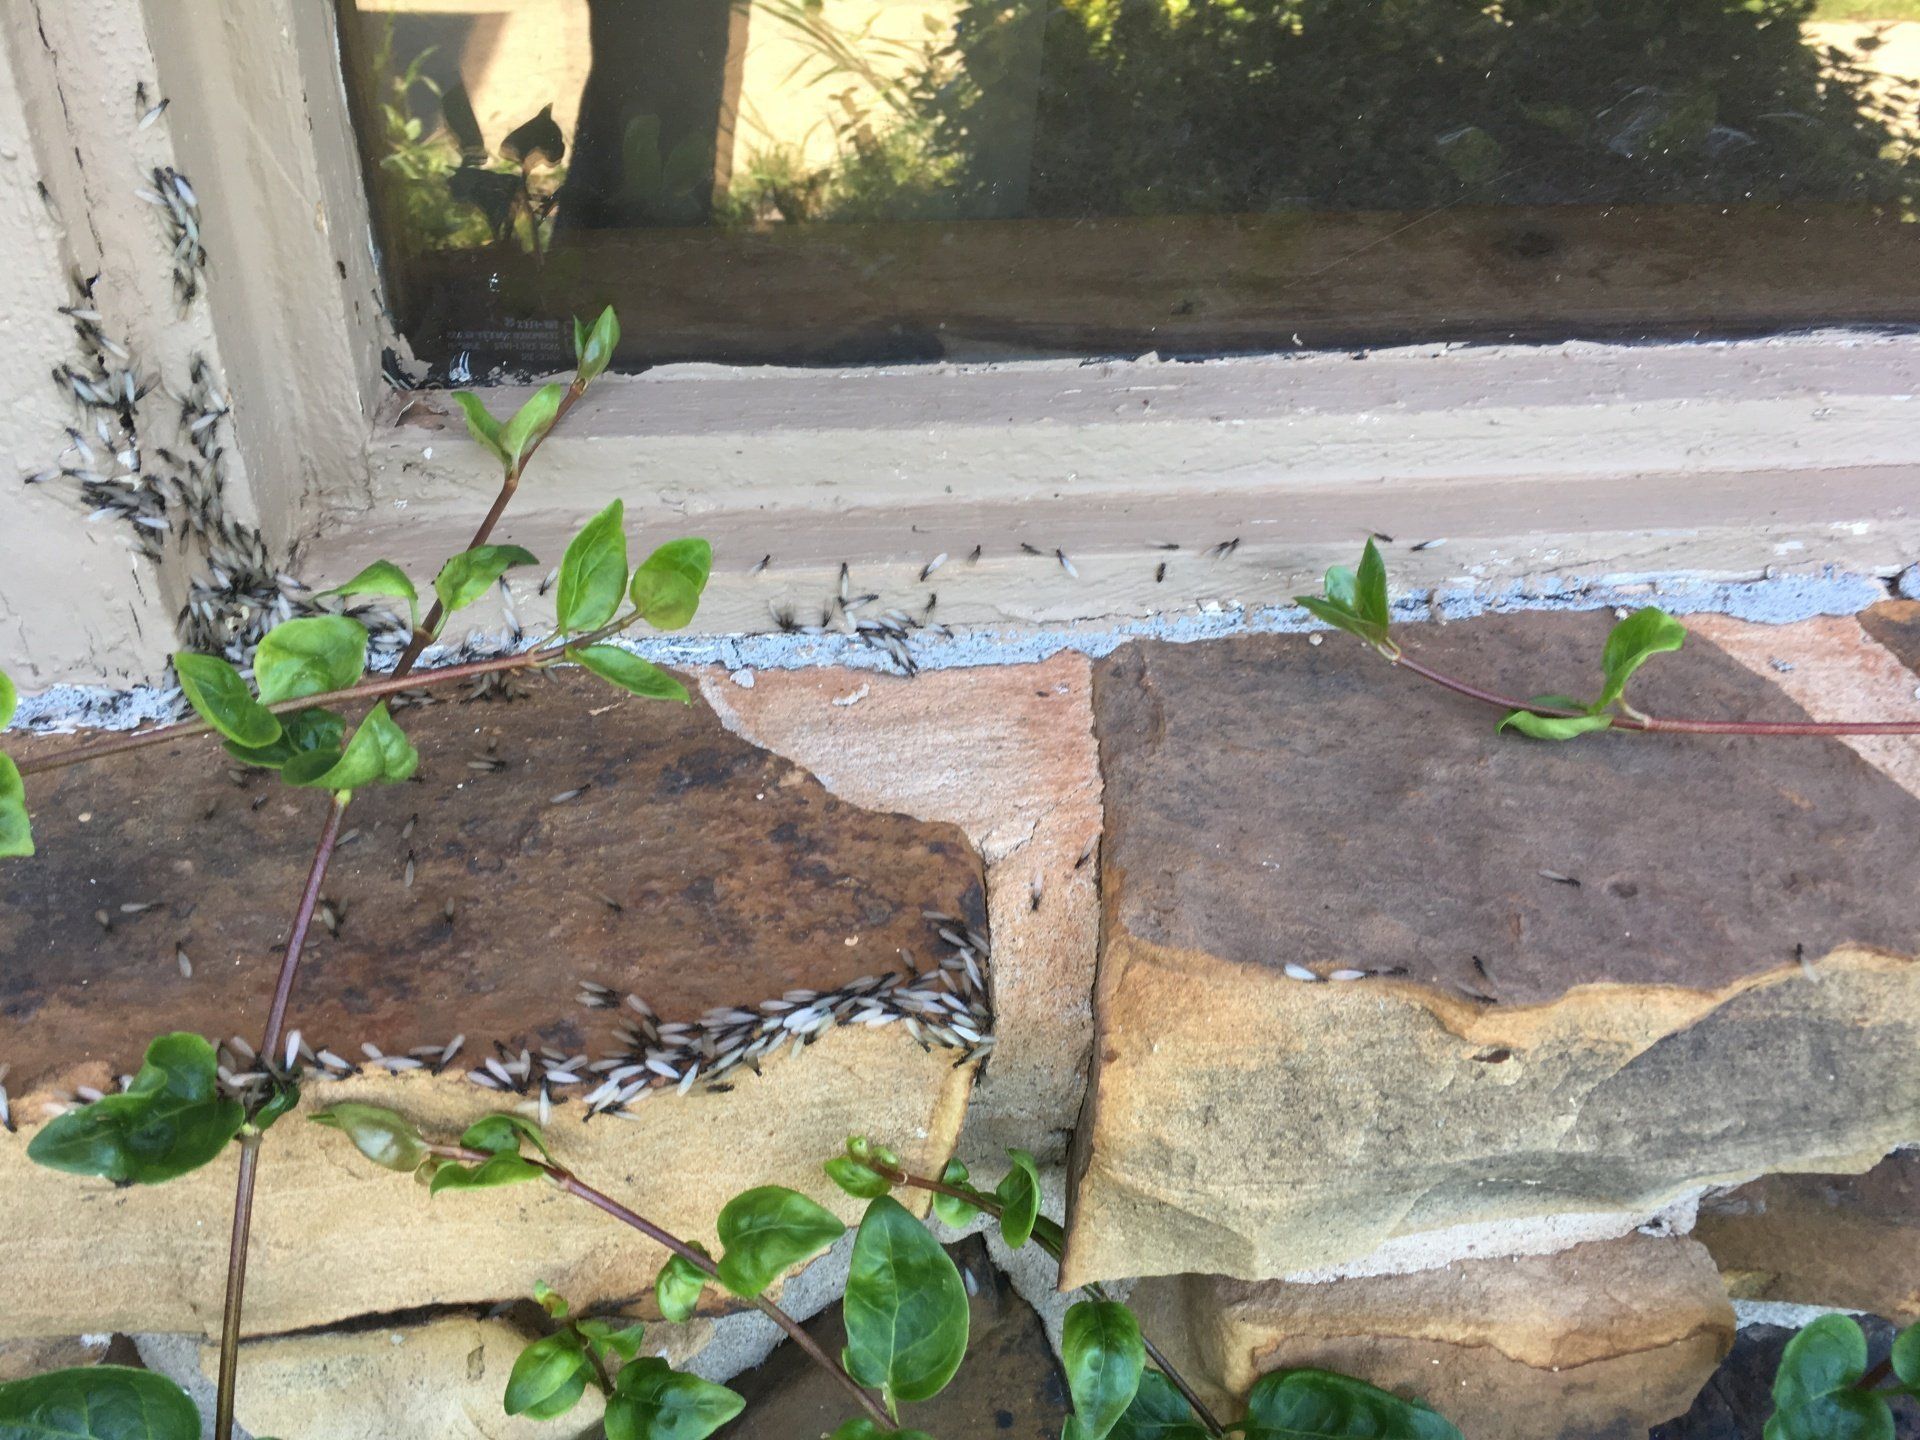 A queue of insects gathering around a stone in the corner of a home building, indicating a potential pest issue